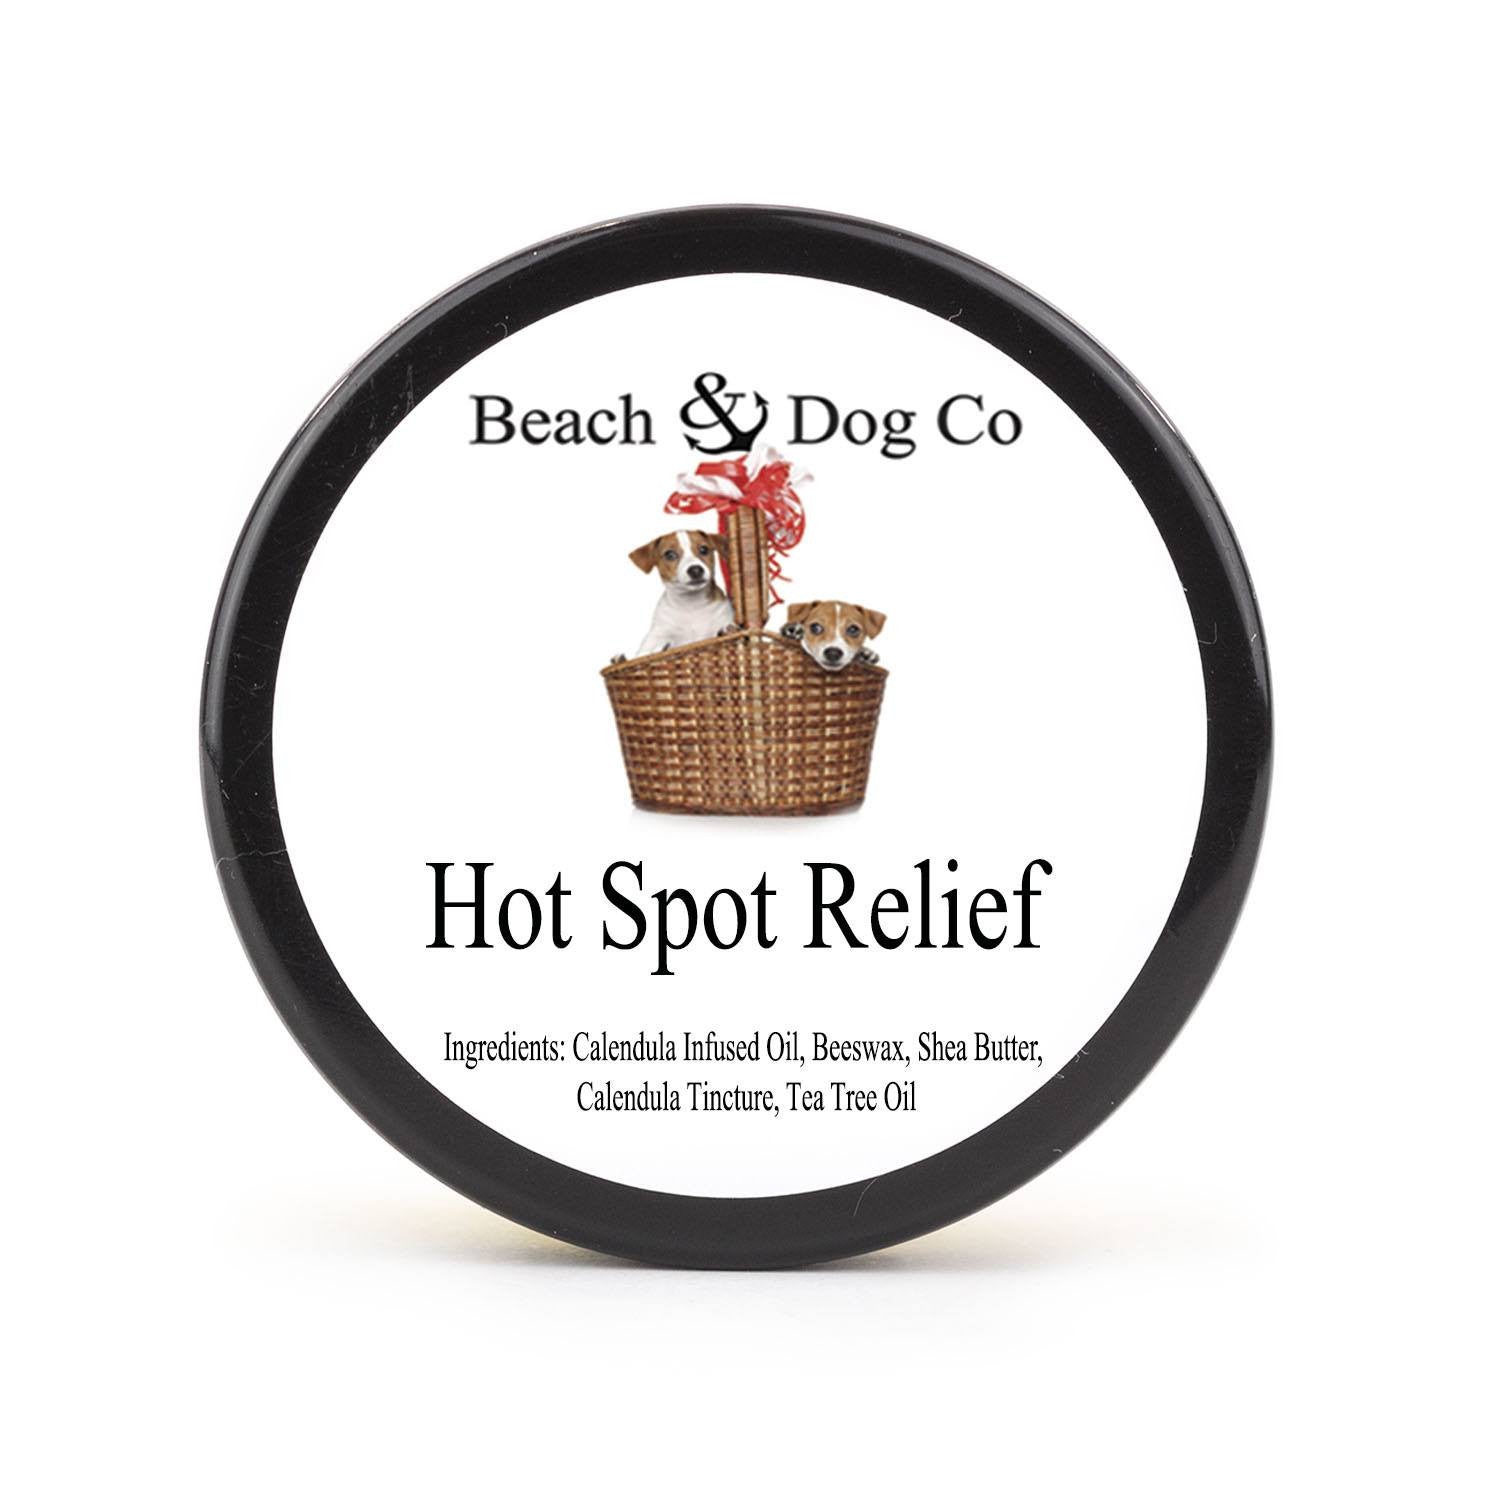 Hot Spot Relief (2 oz) Natural Itch Relief for Dogs - Beach & Dog Co.